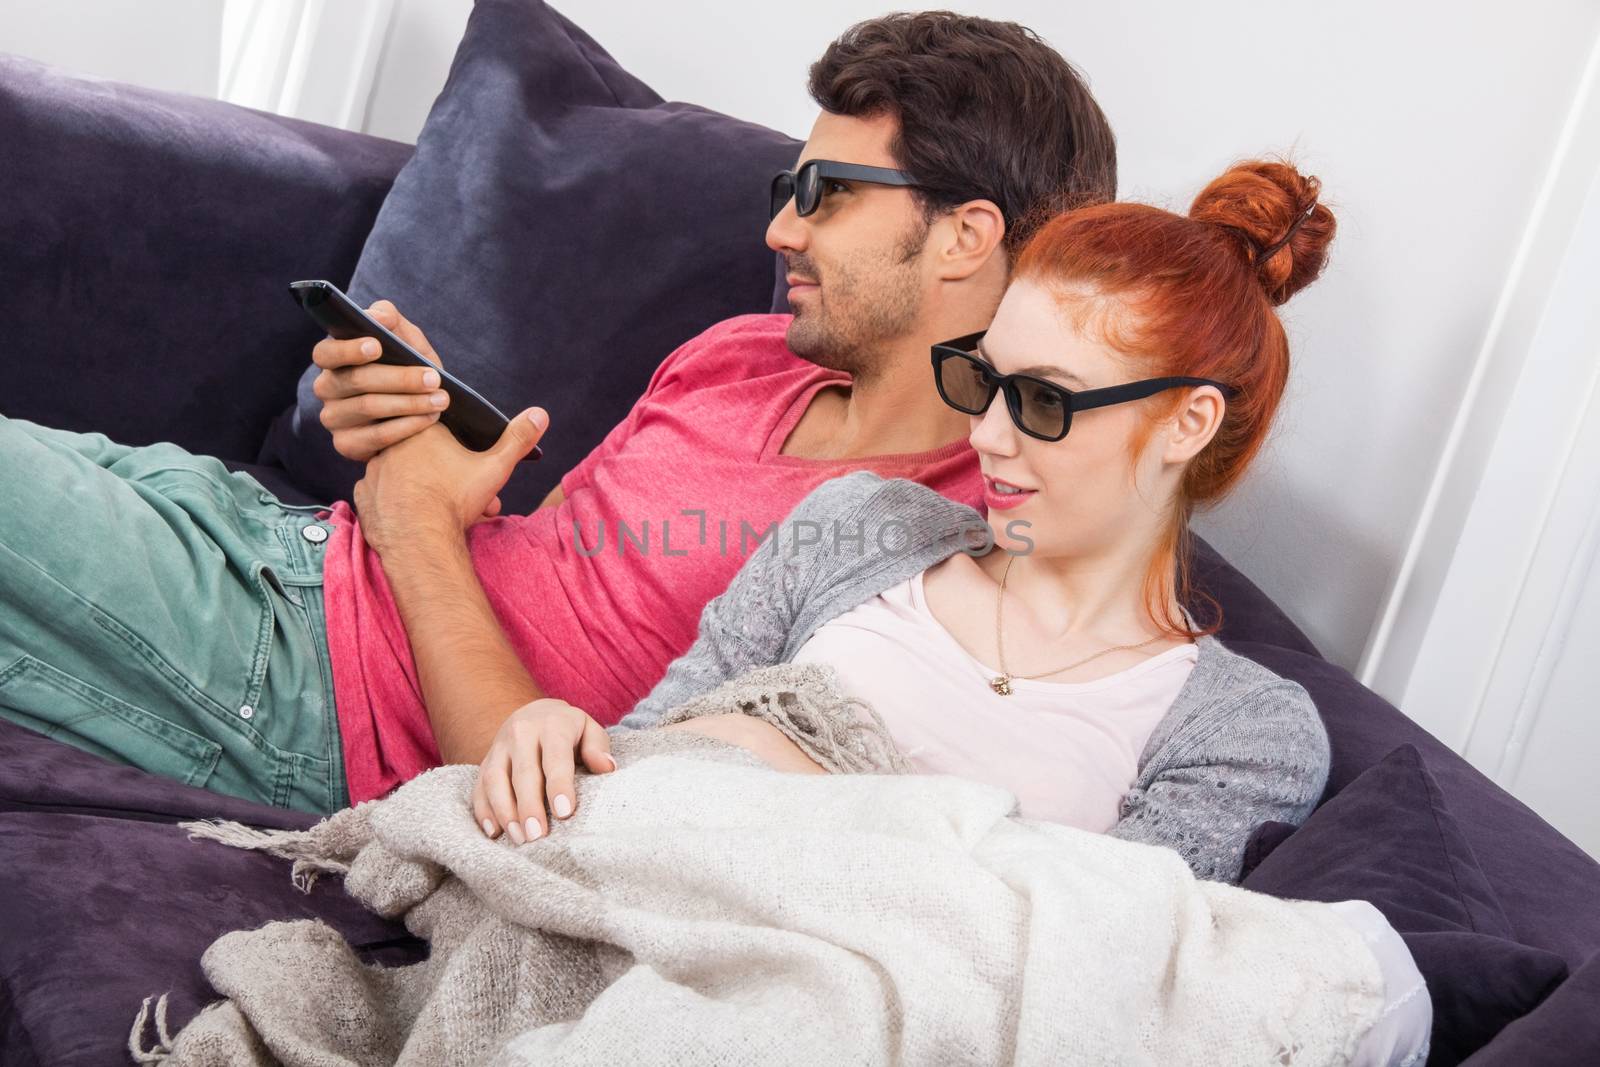 Young Couple Wearing 3D Glasses, Sitting on the Couch in the Living Room, Watching a Movie and Showing Shocked Faces.